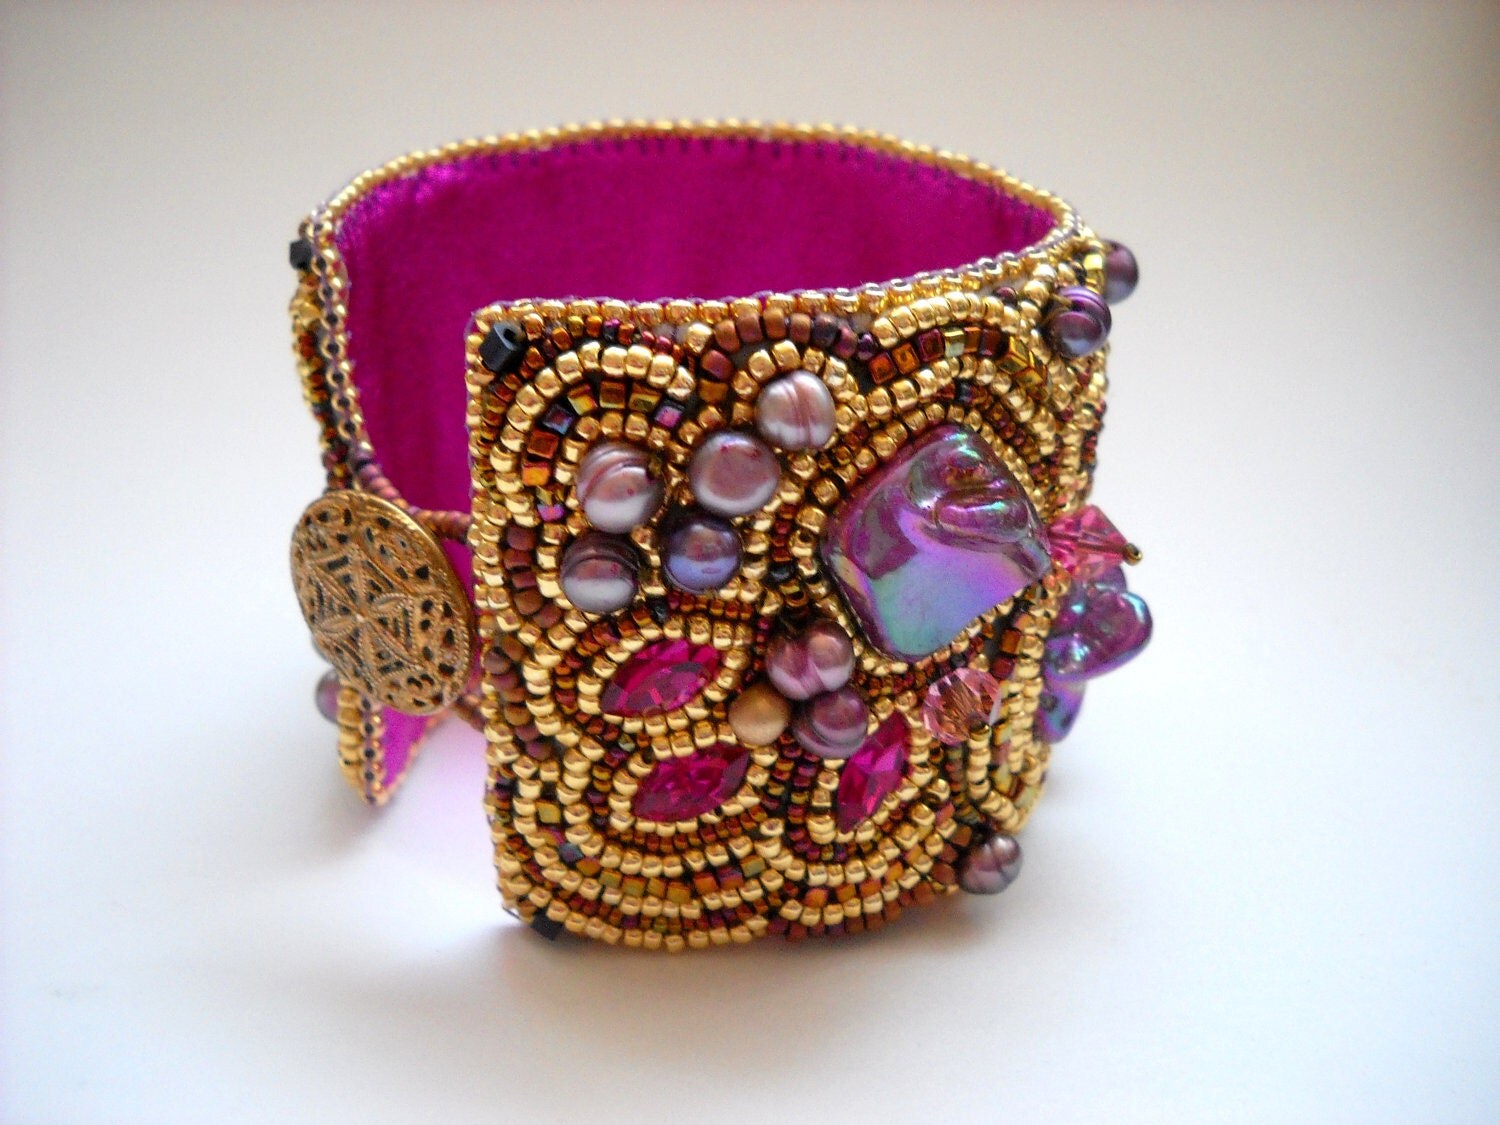 Inner Smile Bead Embroidery Bracelet Cuff with Carved Bone